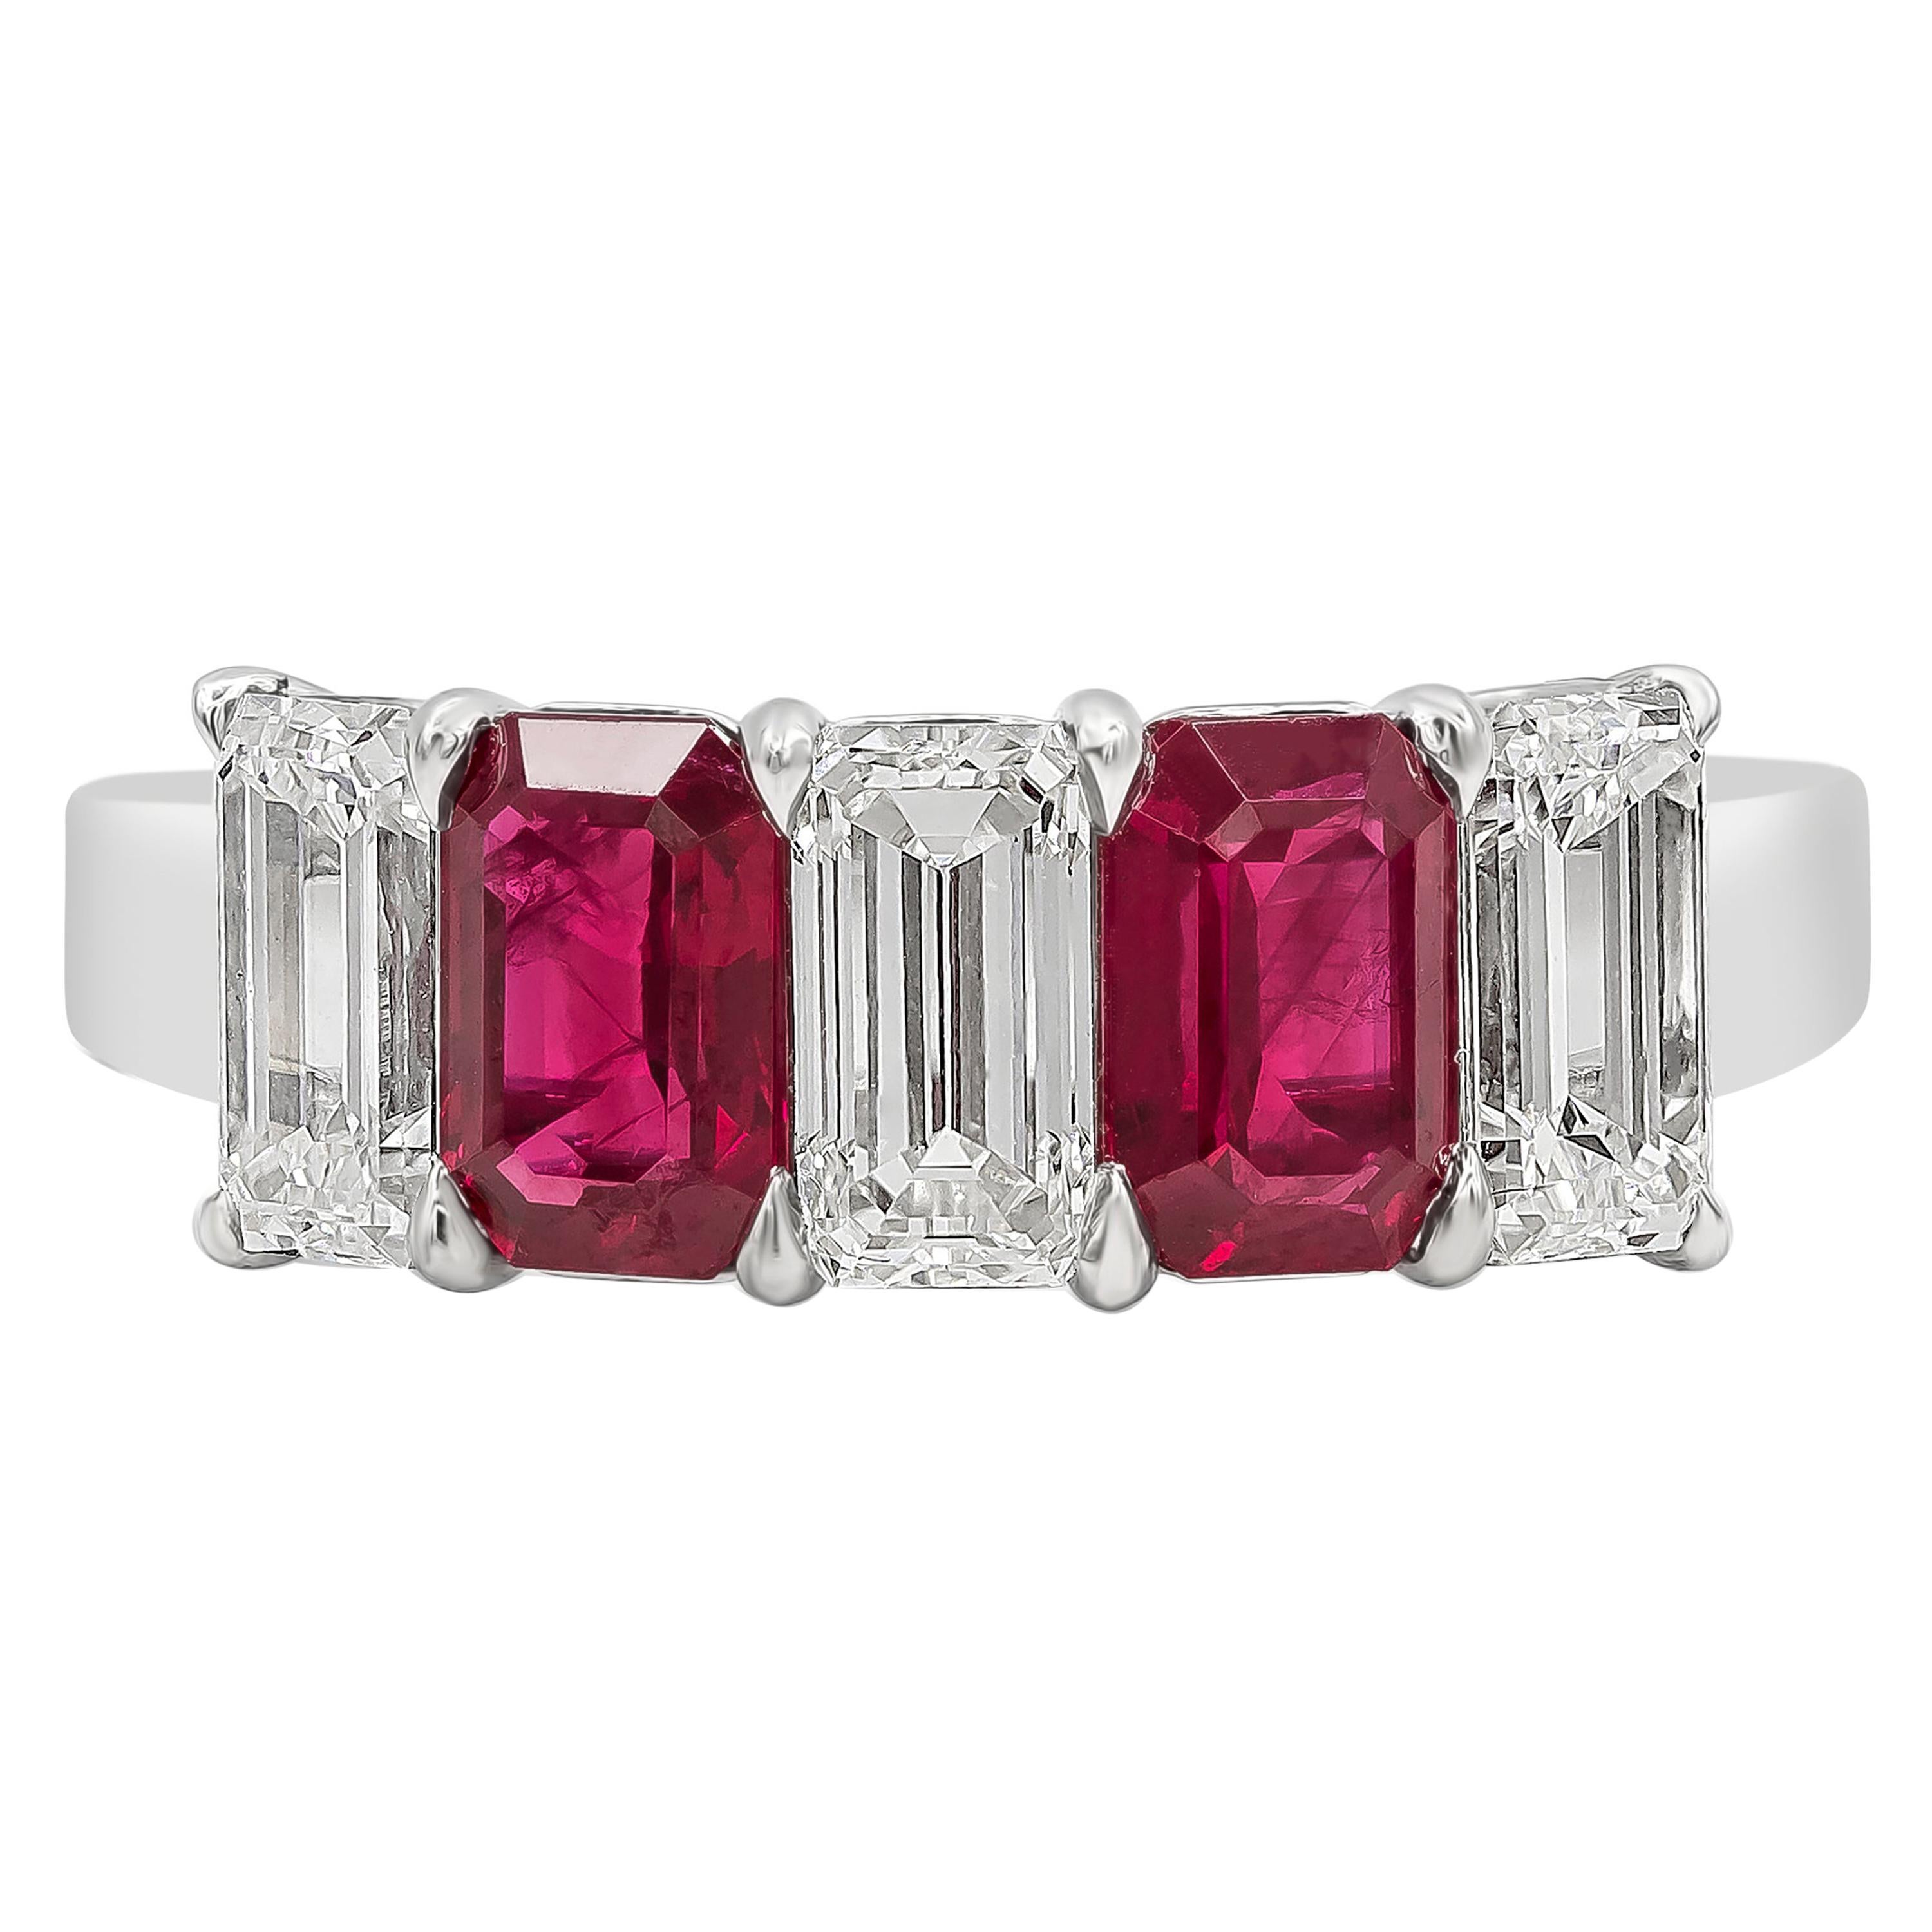 Alternating Emerald Cut Ruby and Diamond Five-Stone Ring